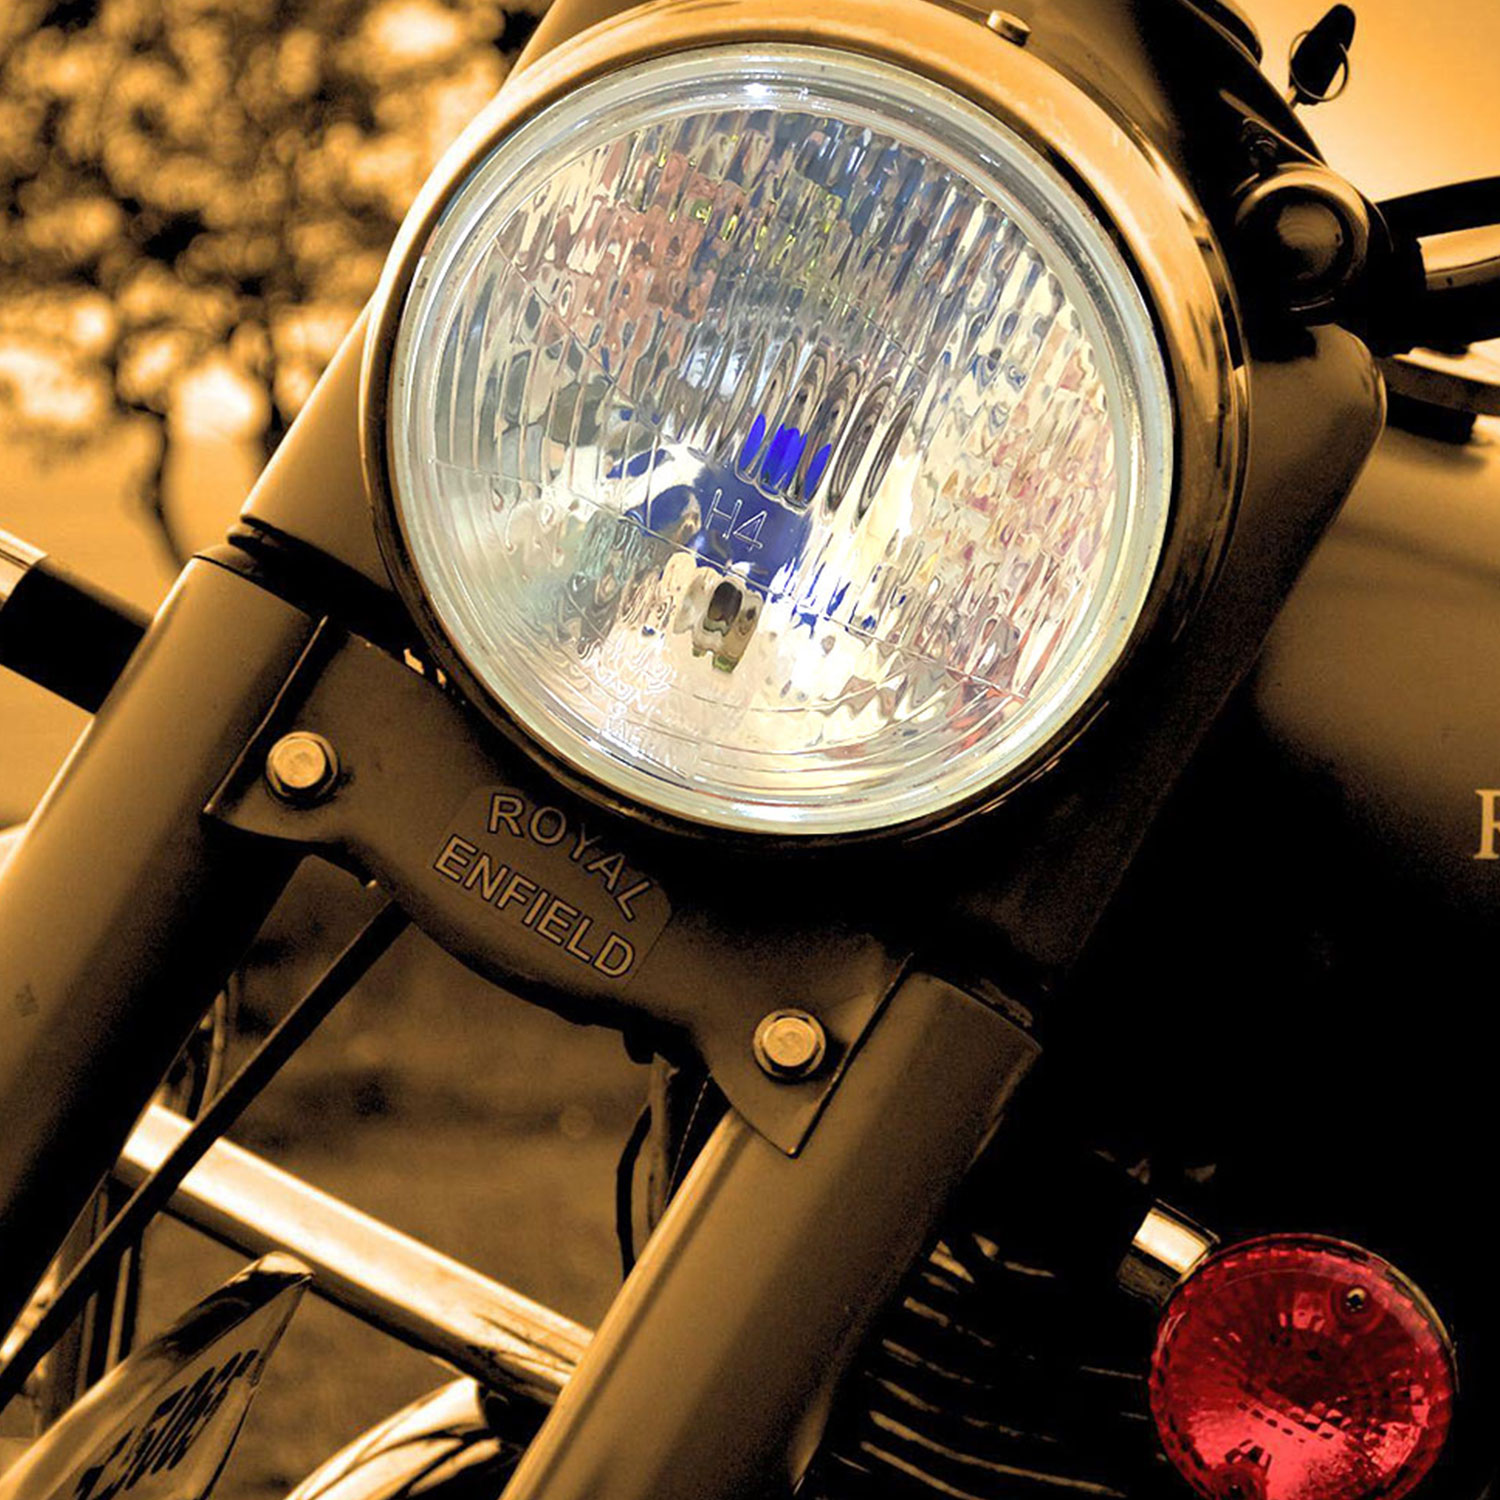 Headlight in Dia 7 Inches for Royal Enfield Bikes amp Thar Jeep Cars